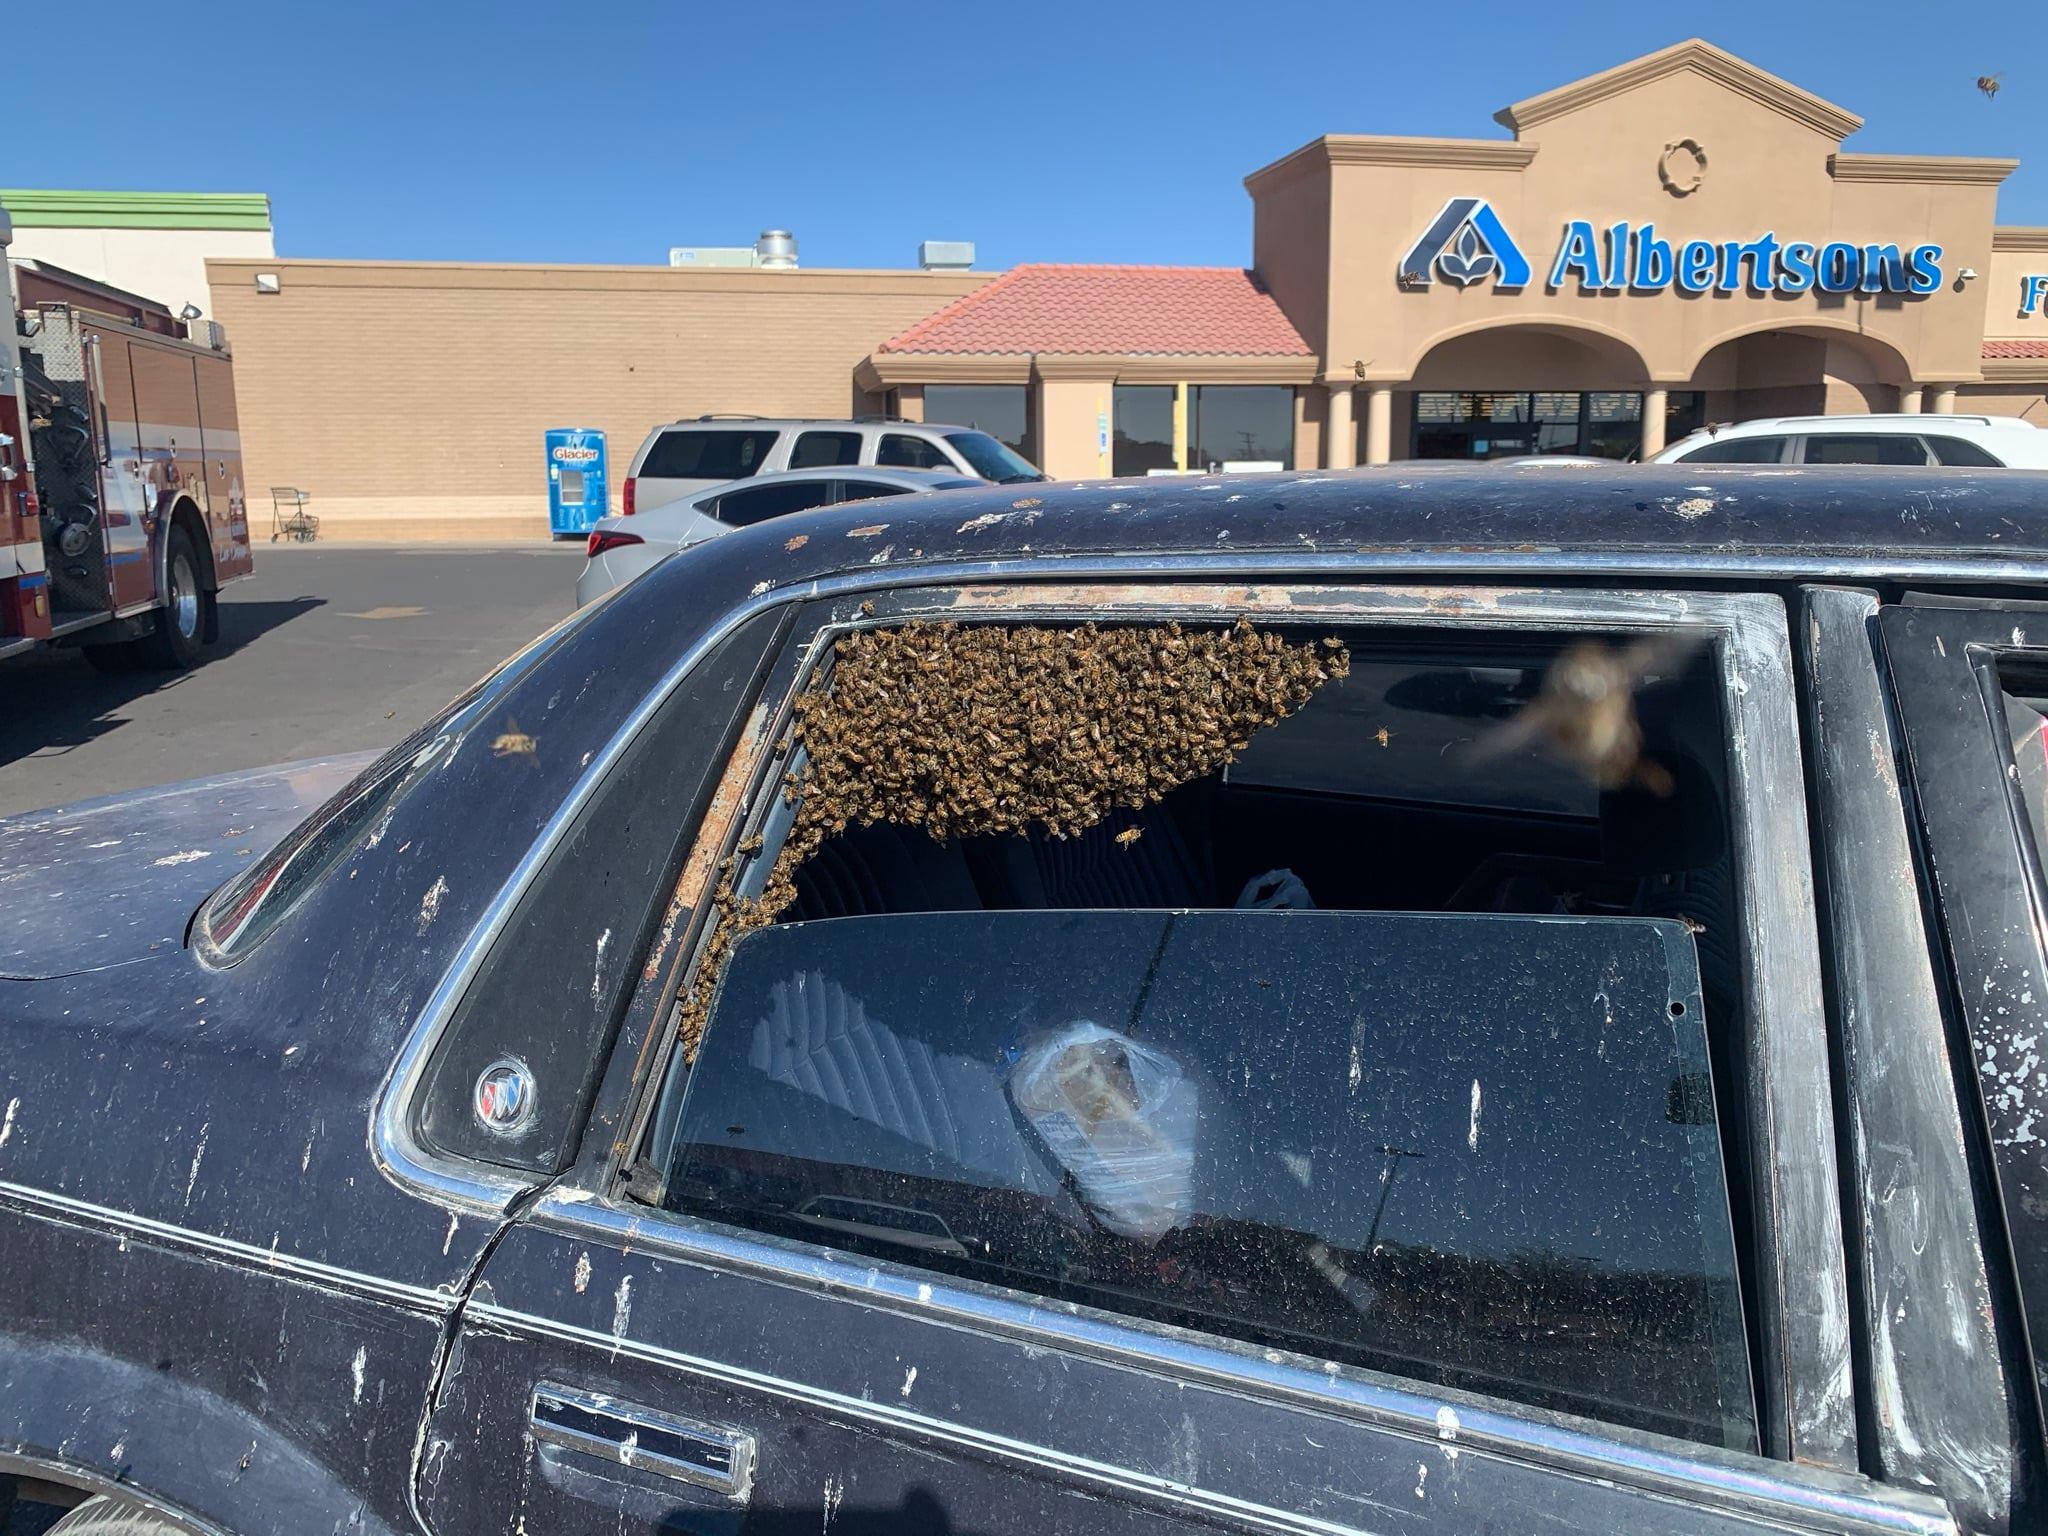 More Than 15,000 Bees Swarm A Car In A Grocery Store Parking Lot